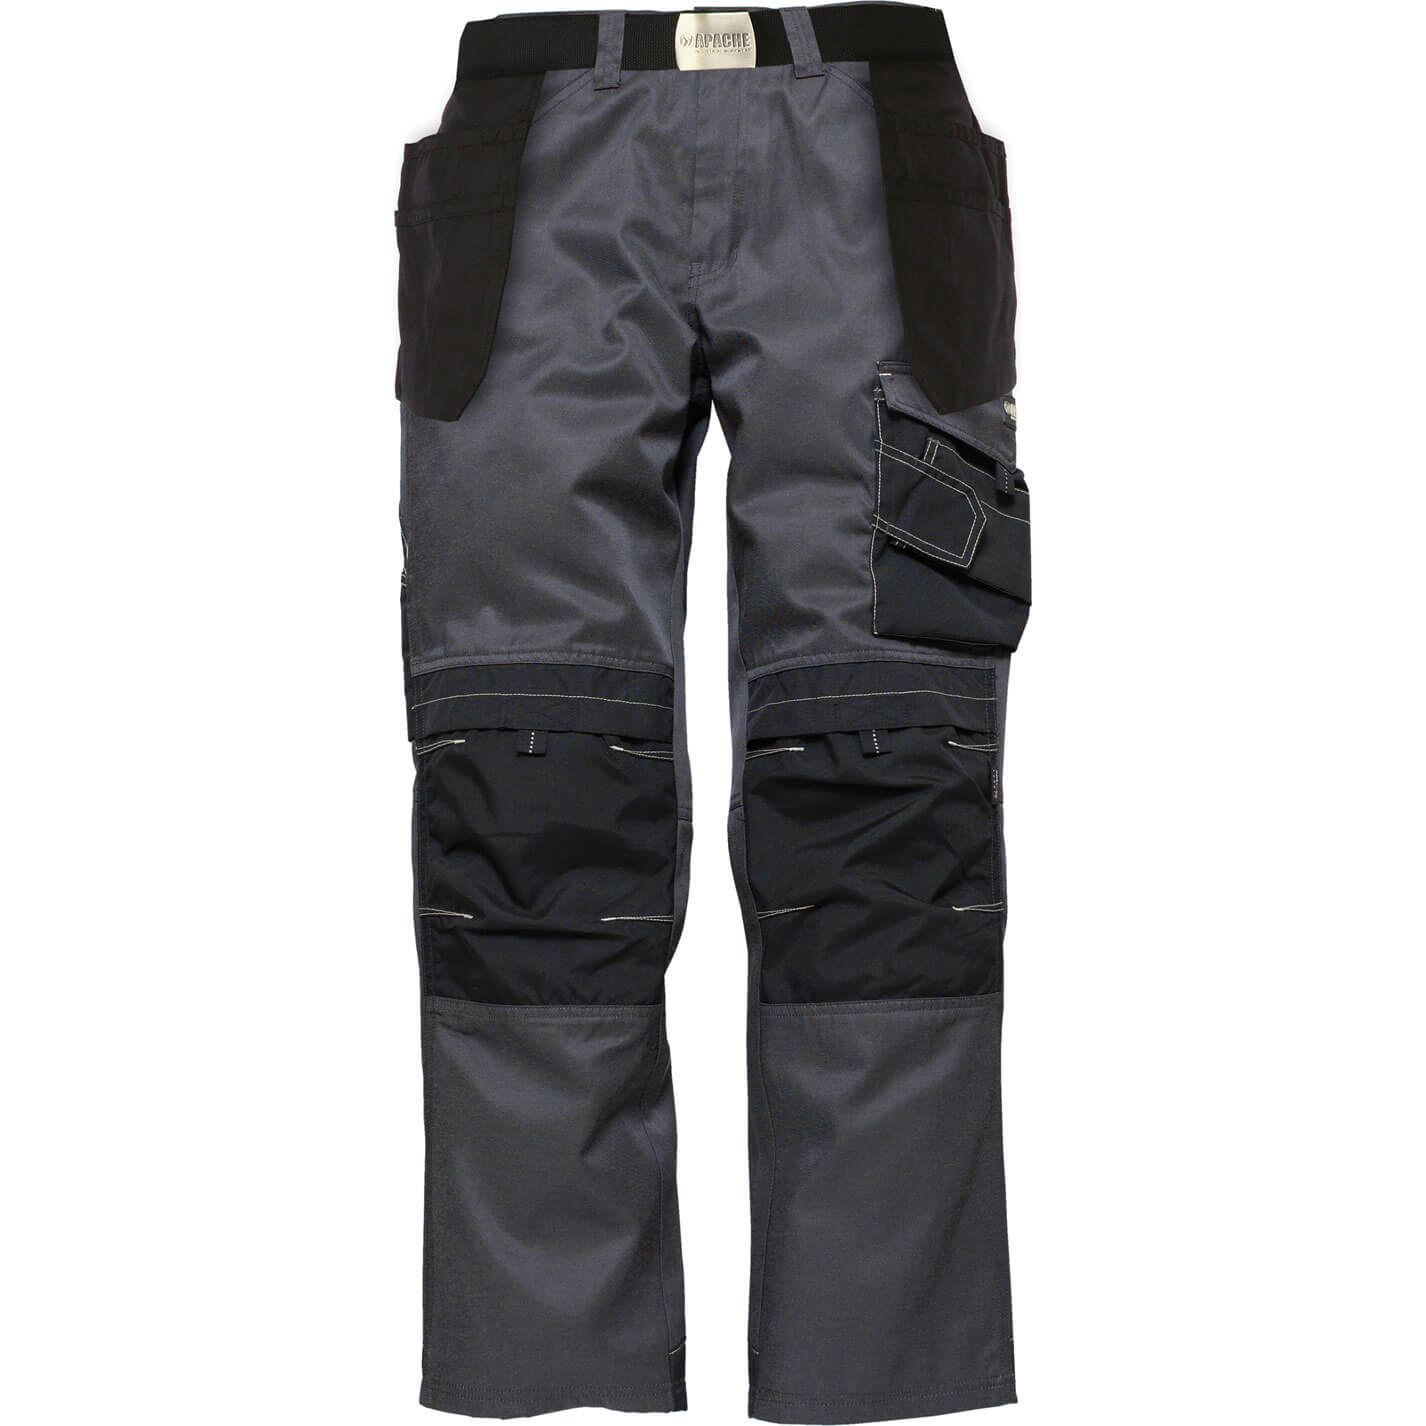 Image of Apache Mens Pro Twill Trousers Black / Grey 30" 31"